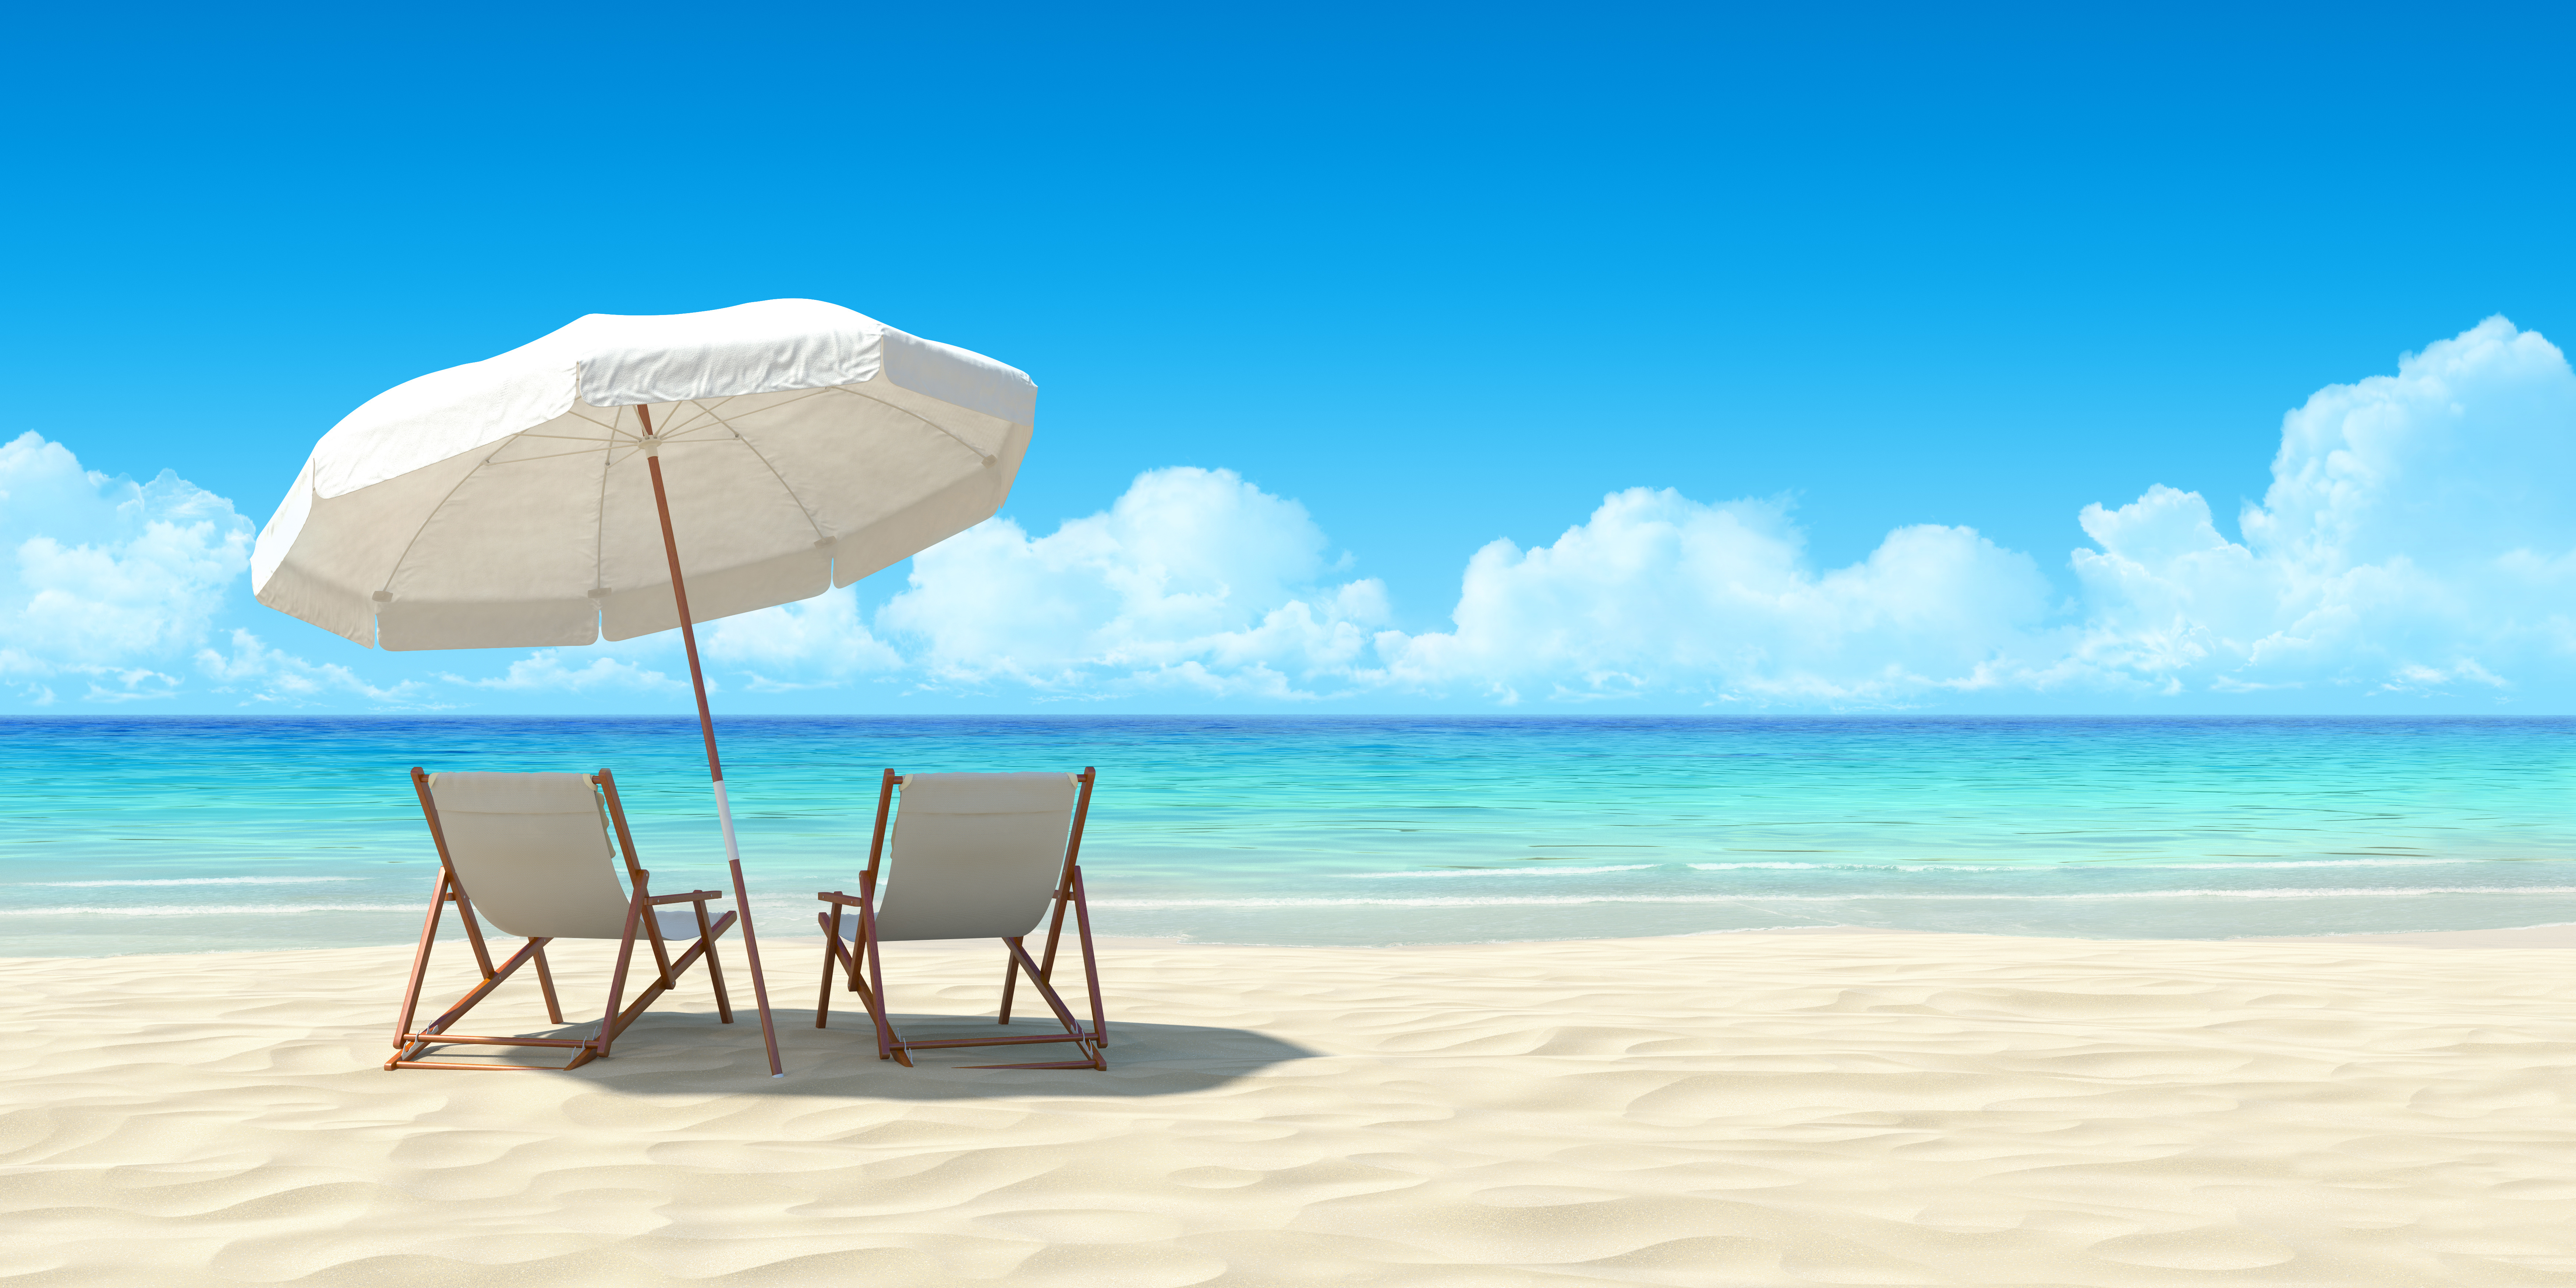 HQ Beach Wallpapers | File 7194.92Kb